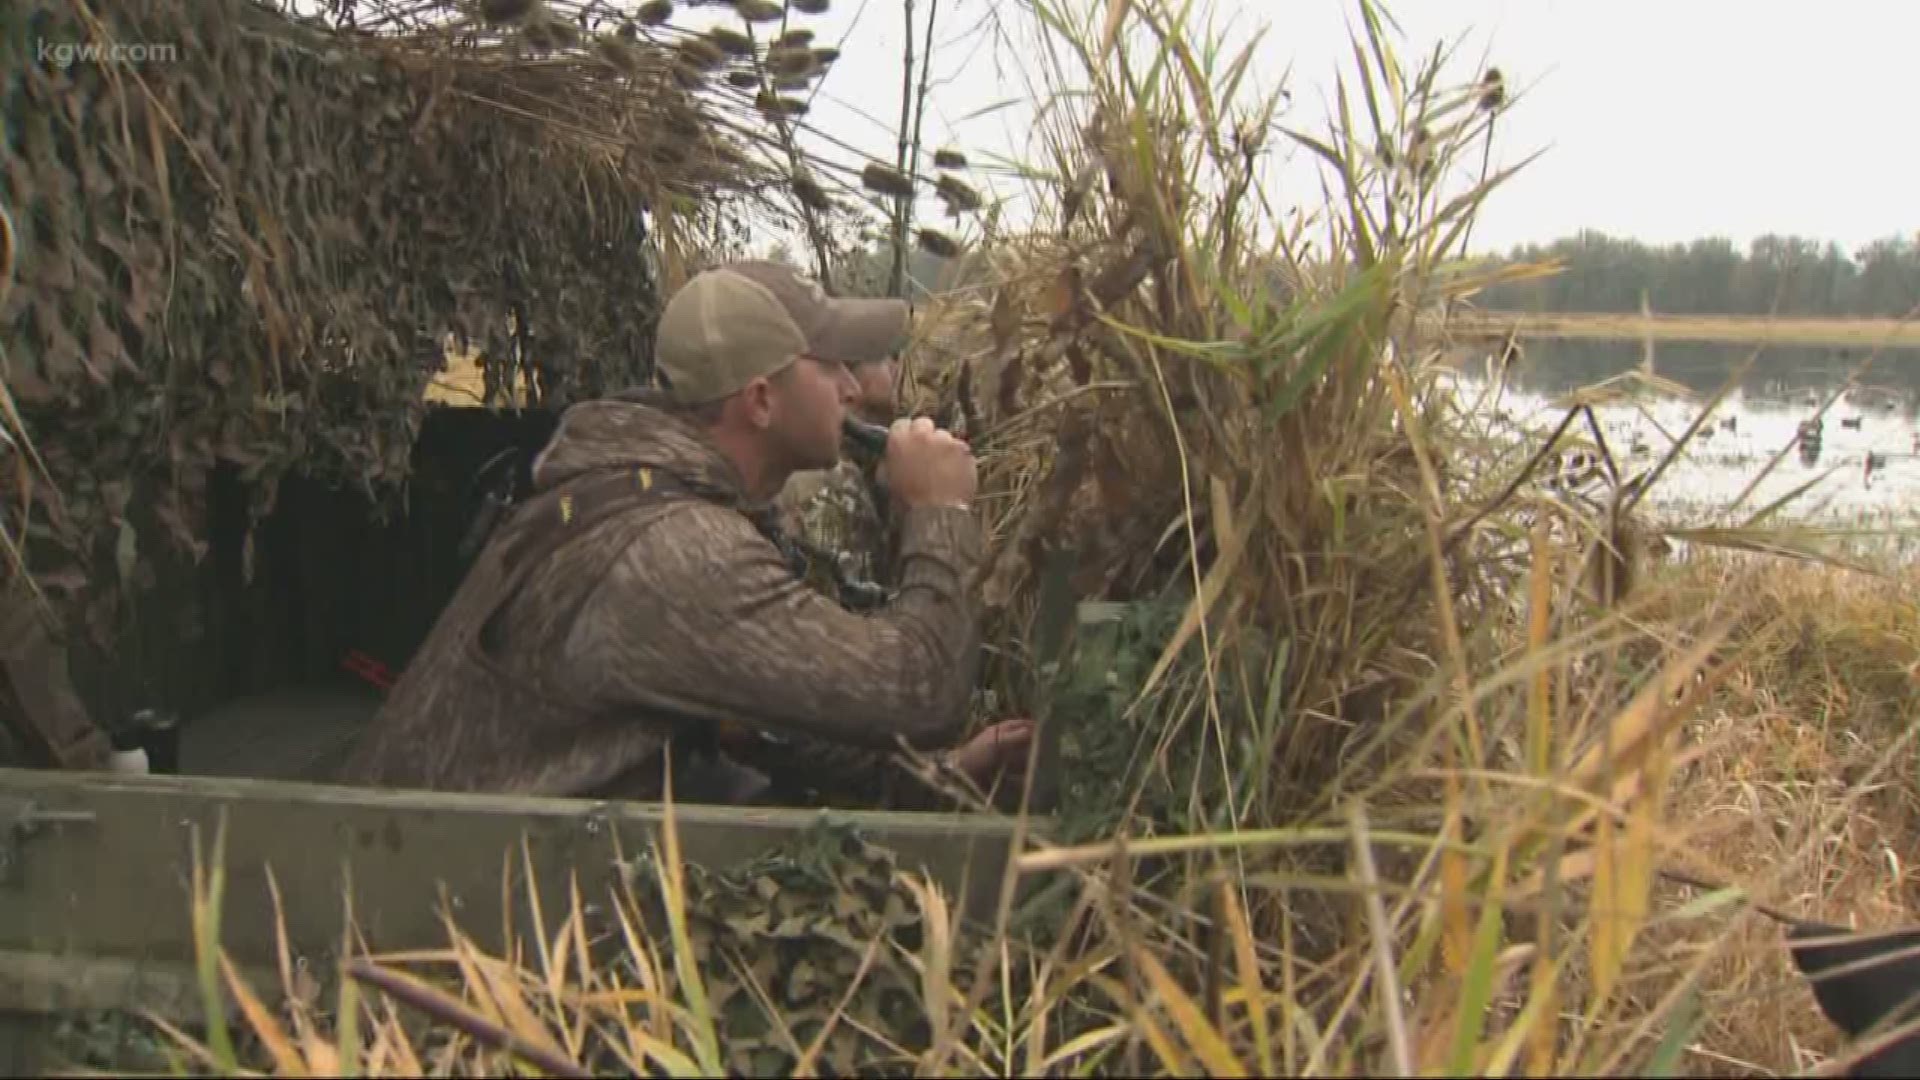 Veterans Day is Monday, and to say thank you, 20 local active and retired military members got a chance to head into the wilderness for a special duck hunting trip.